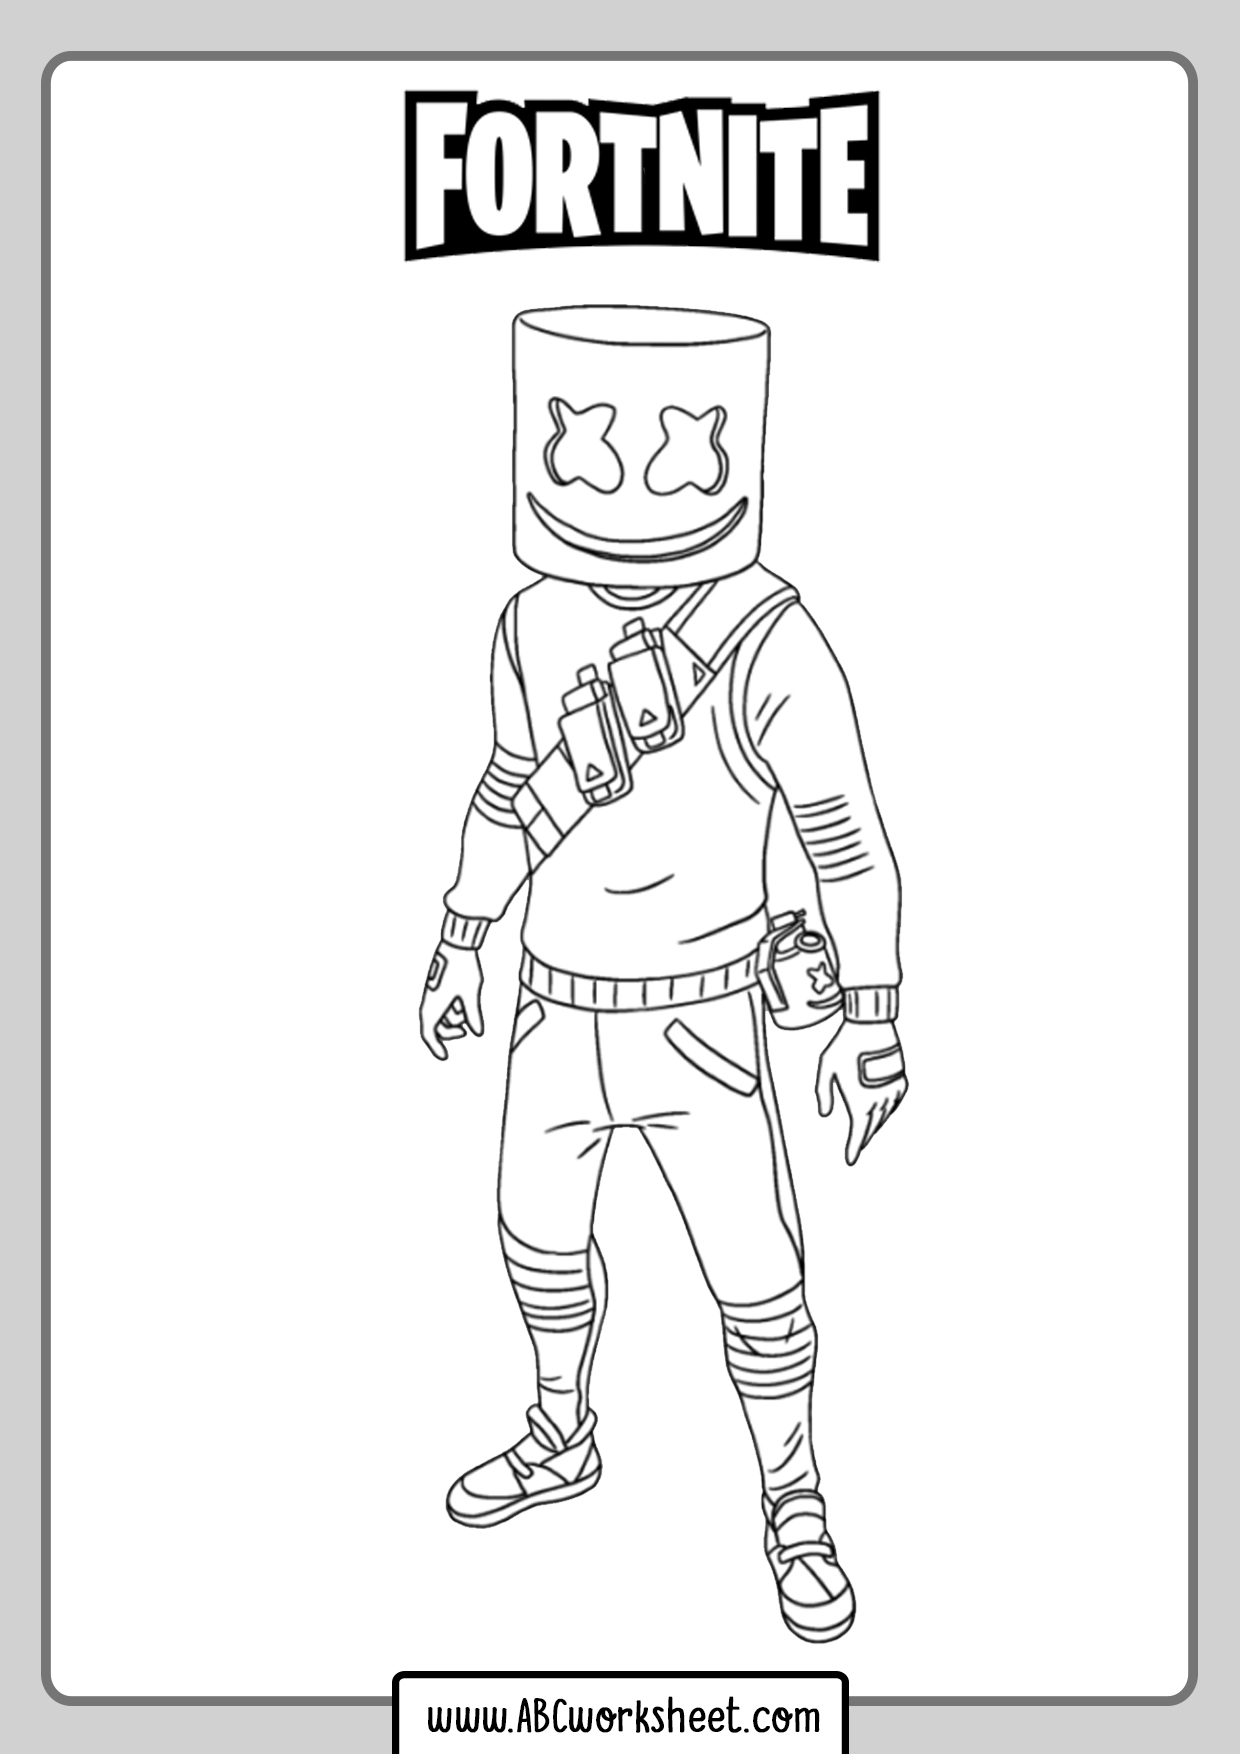 fortnite-printable-coloring-pages